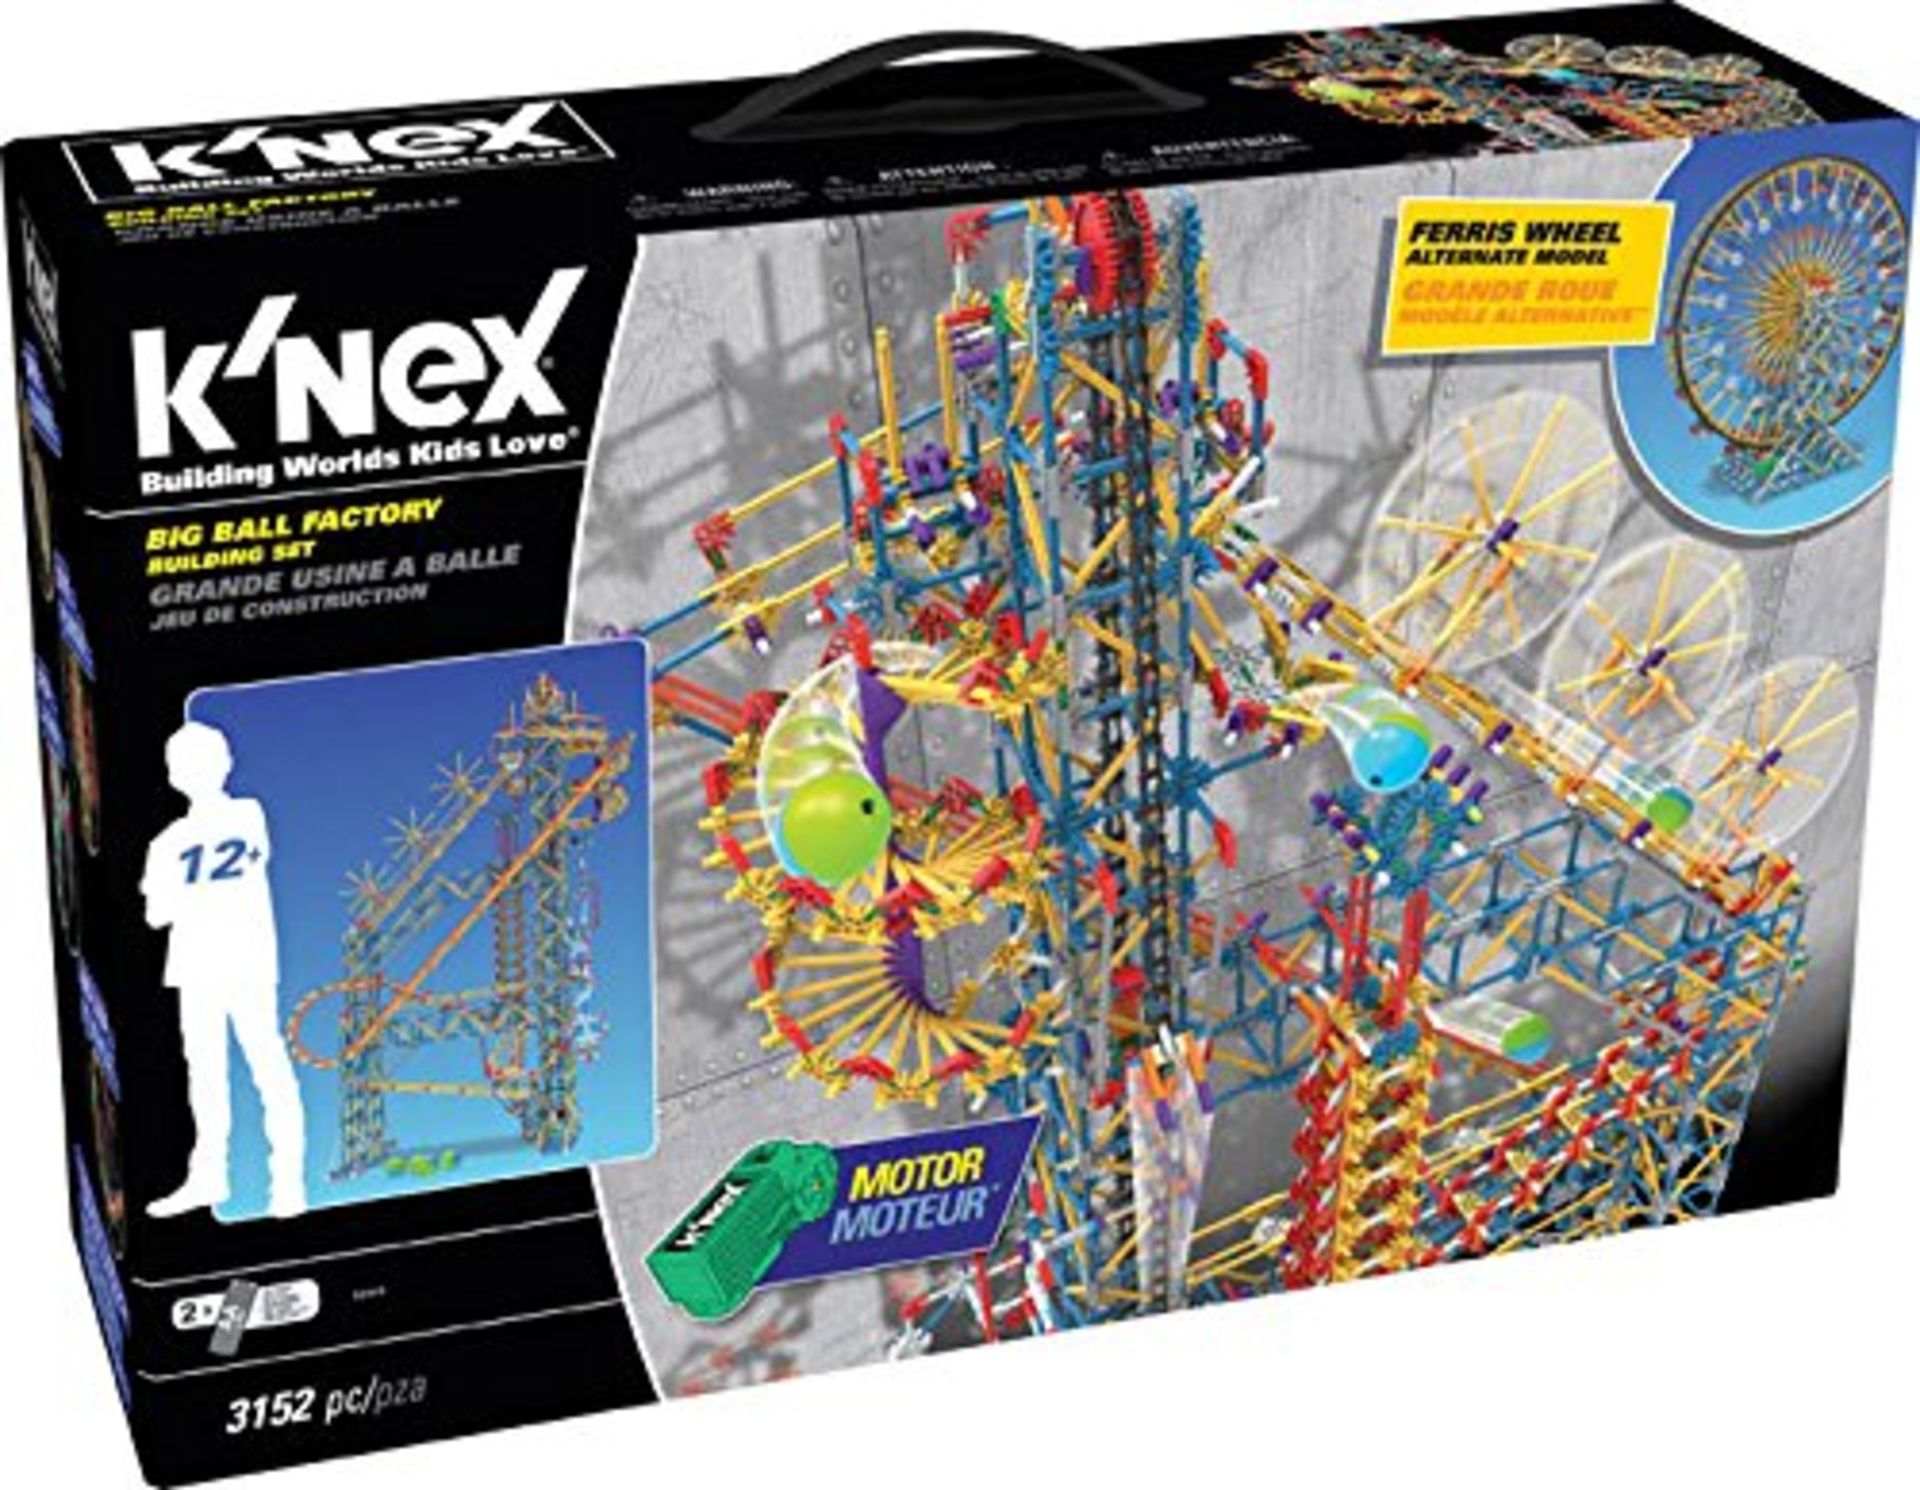 46 x *RETURNS* various models & toys, as listed, RRP £ 2068.40